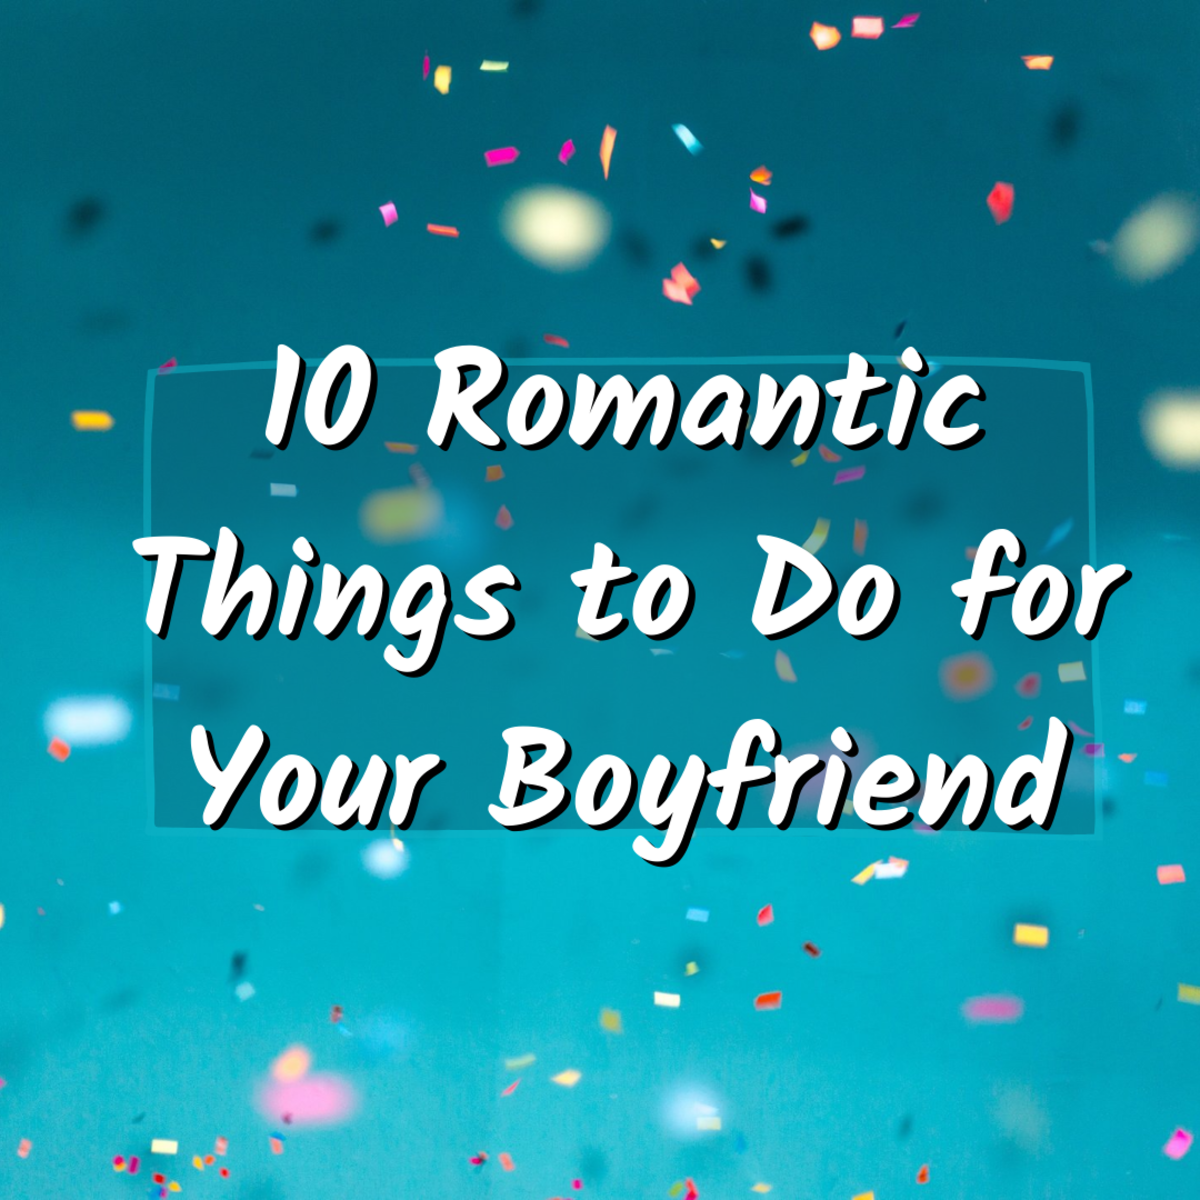 10 Romantic Things to Do for Your Boyfriend